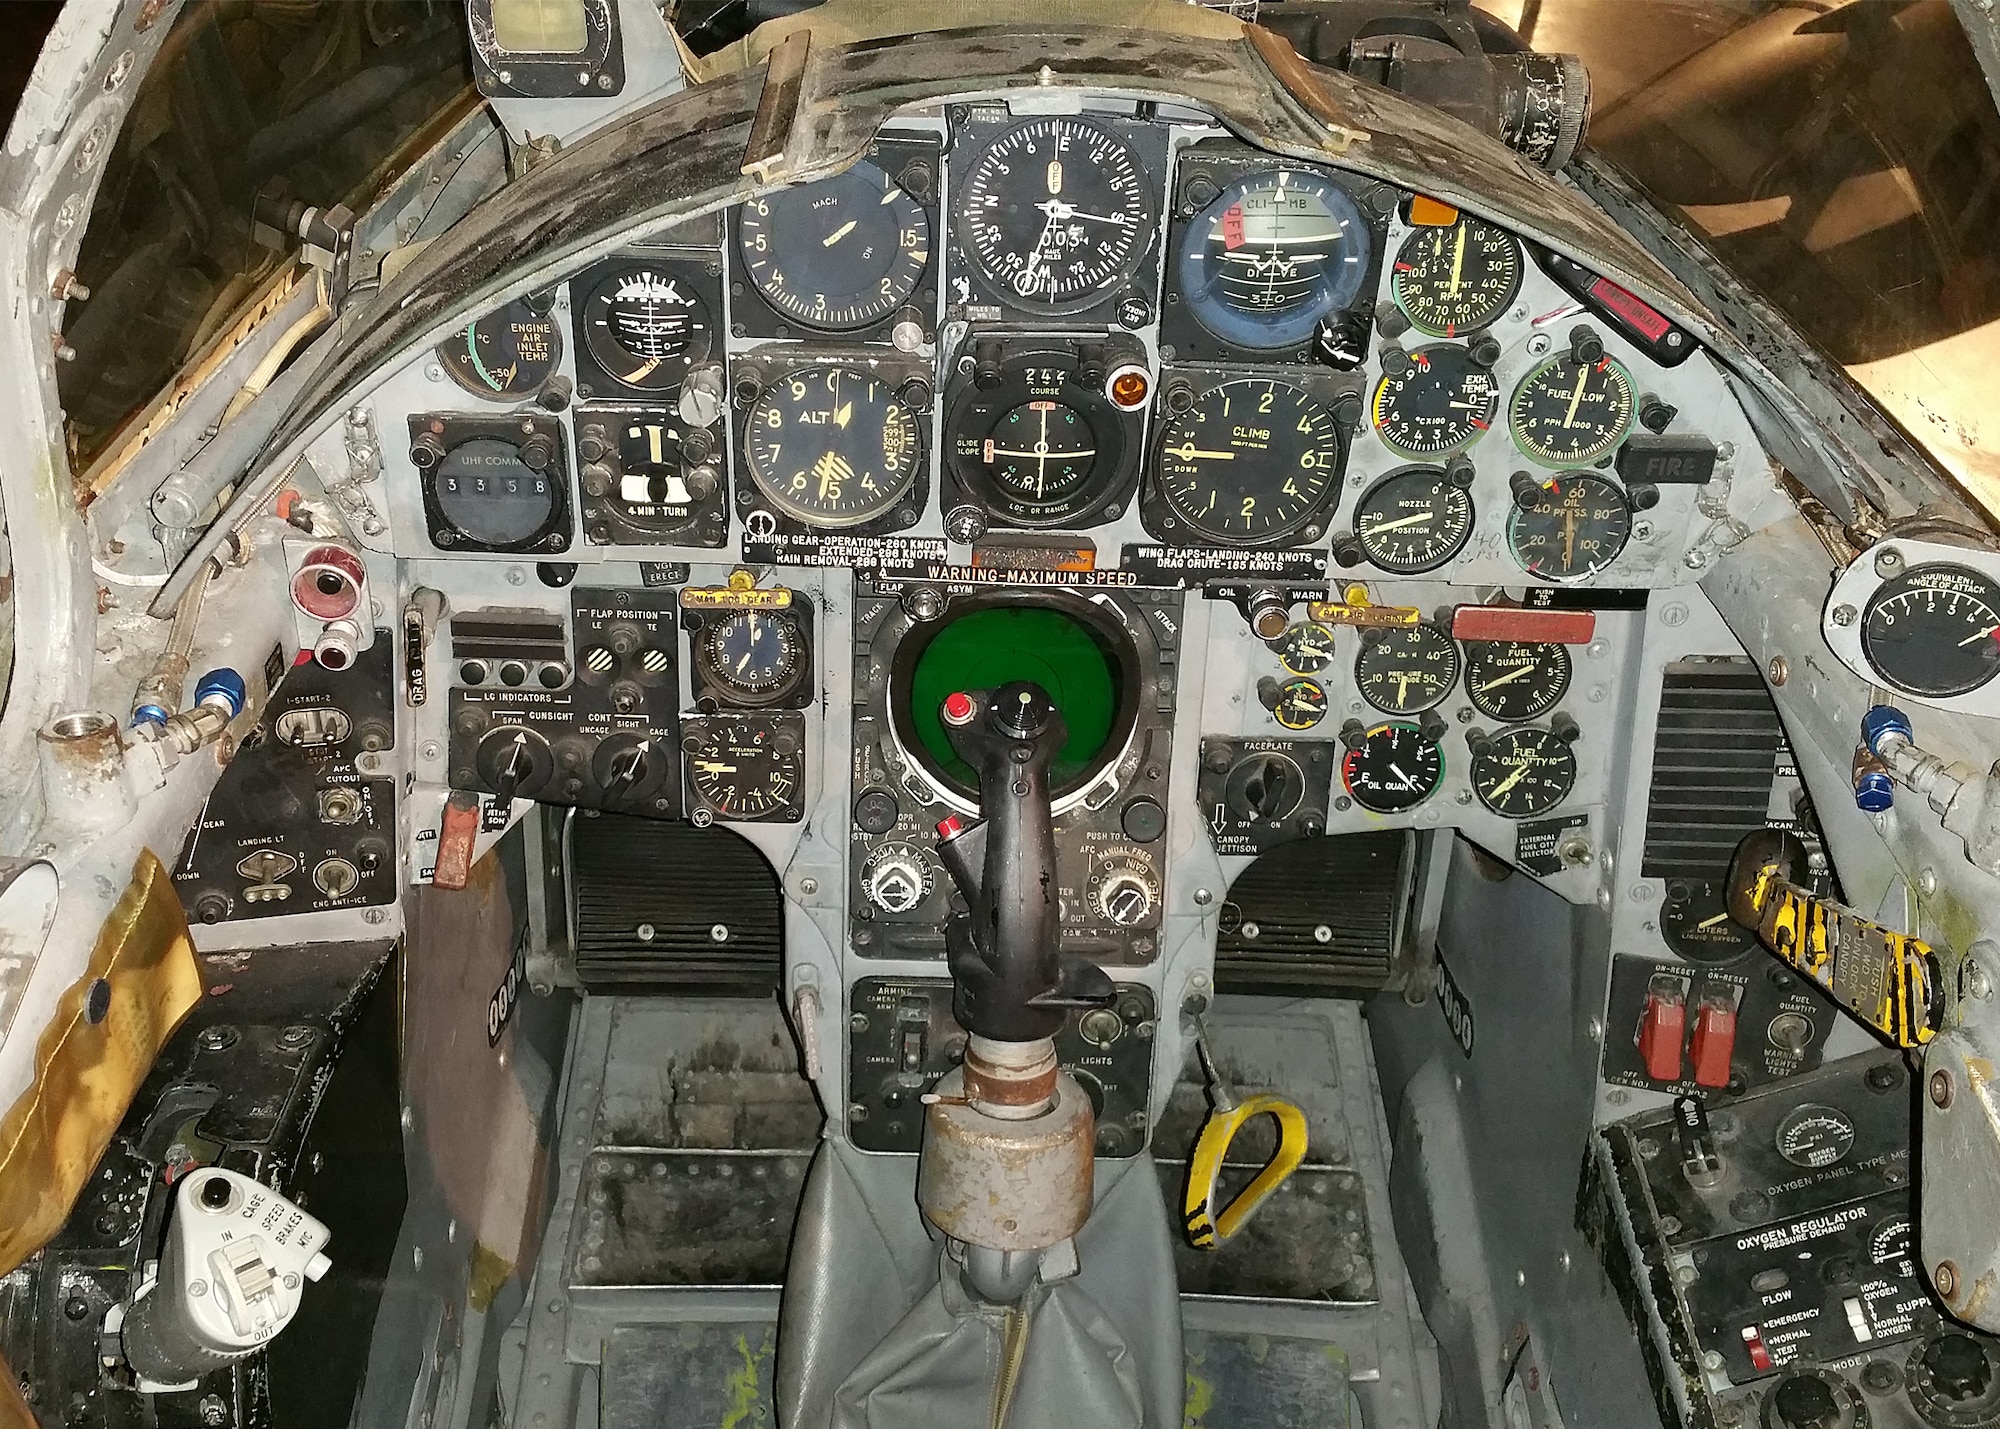 DAYTON, Ohio -- Lockheed F-104C Starfighter cockpit in the Cold War Gallery at the National Museum of the United States Air Force. (U.S. Air Force photo by Ken LaRock)